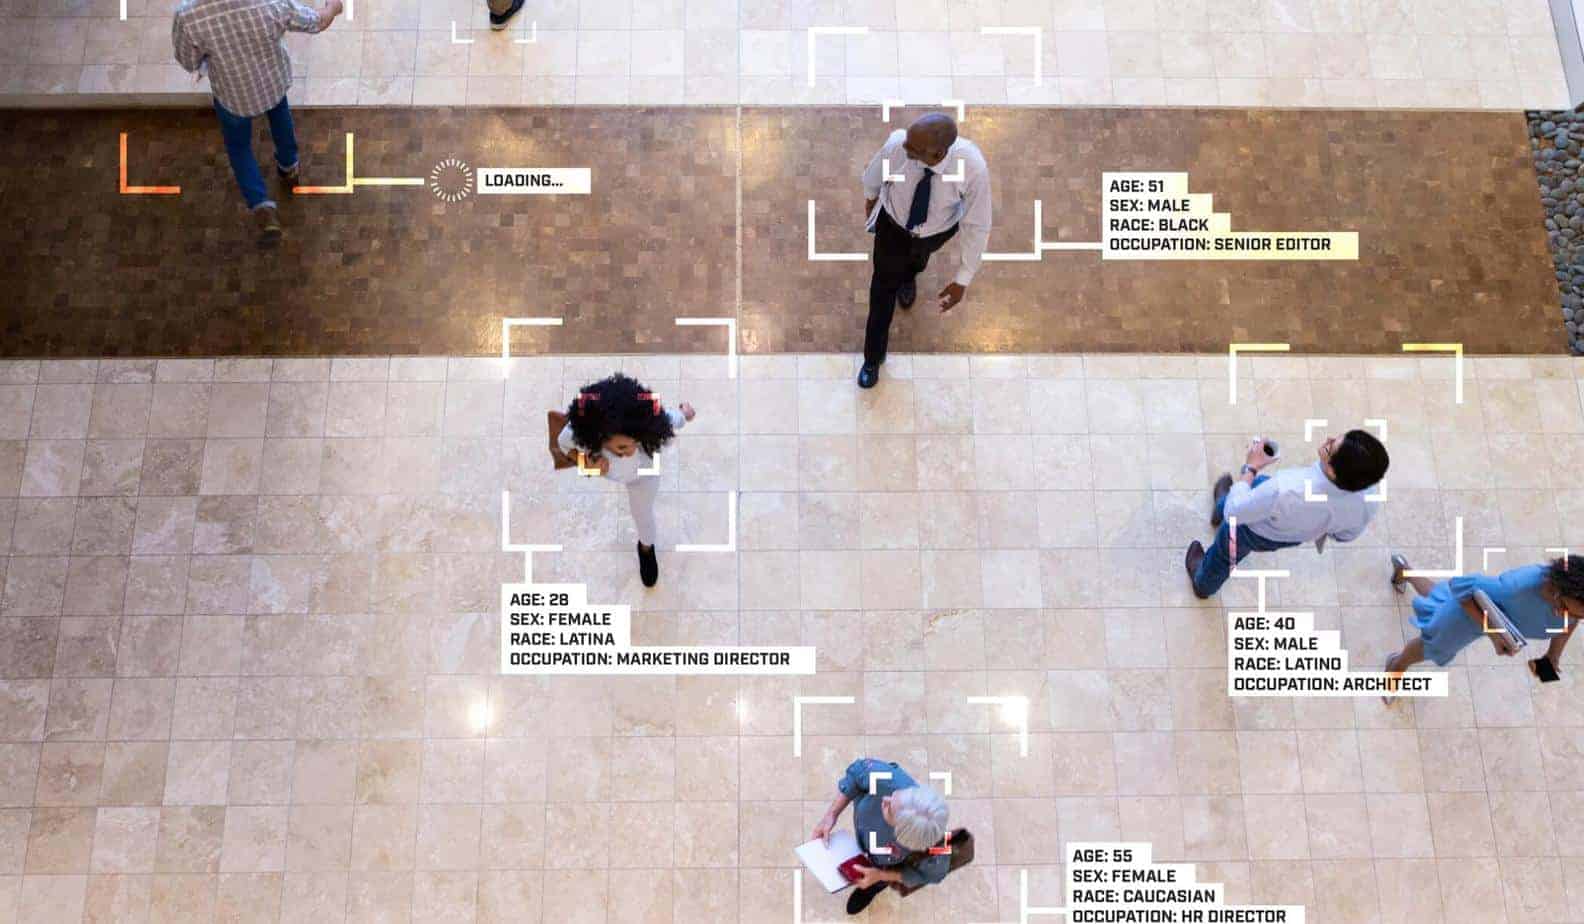 Camera view of face recognition on people walking in lobby